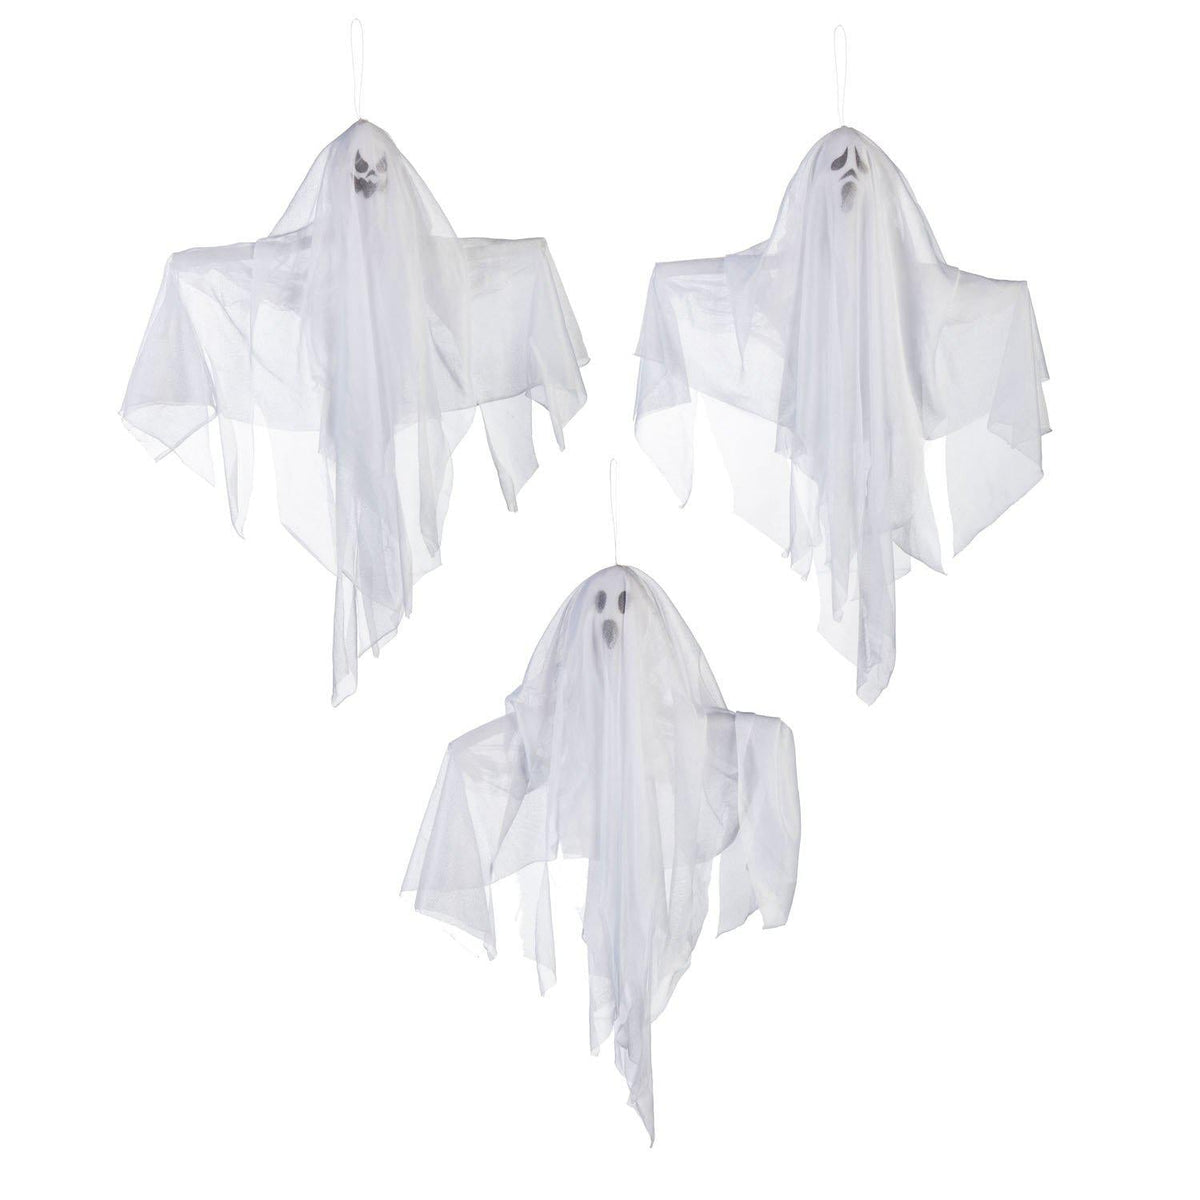 Add a little spookiness to your Halloween decorations with this trio of hanging ghosts. Each ghost features a different expression and can be hung by the attached string so they appear to float through the air.